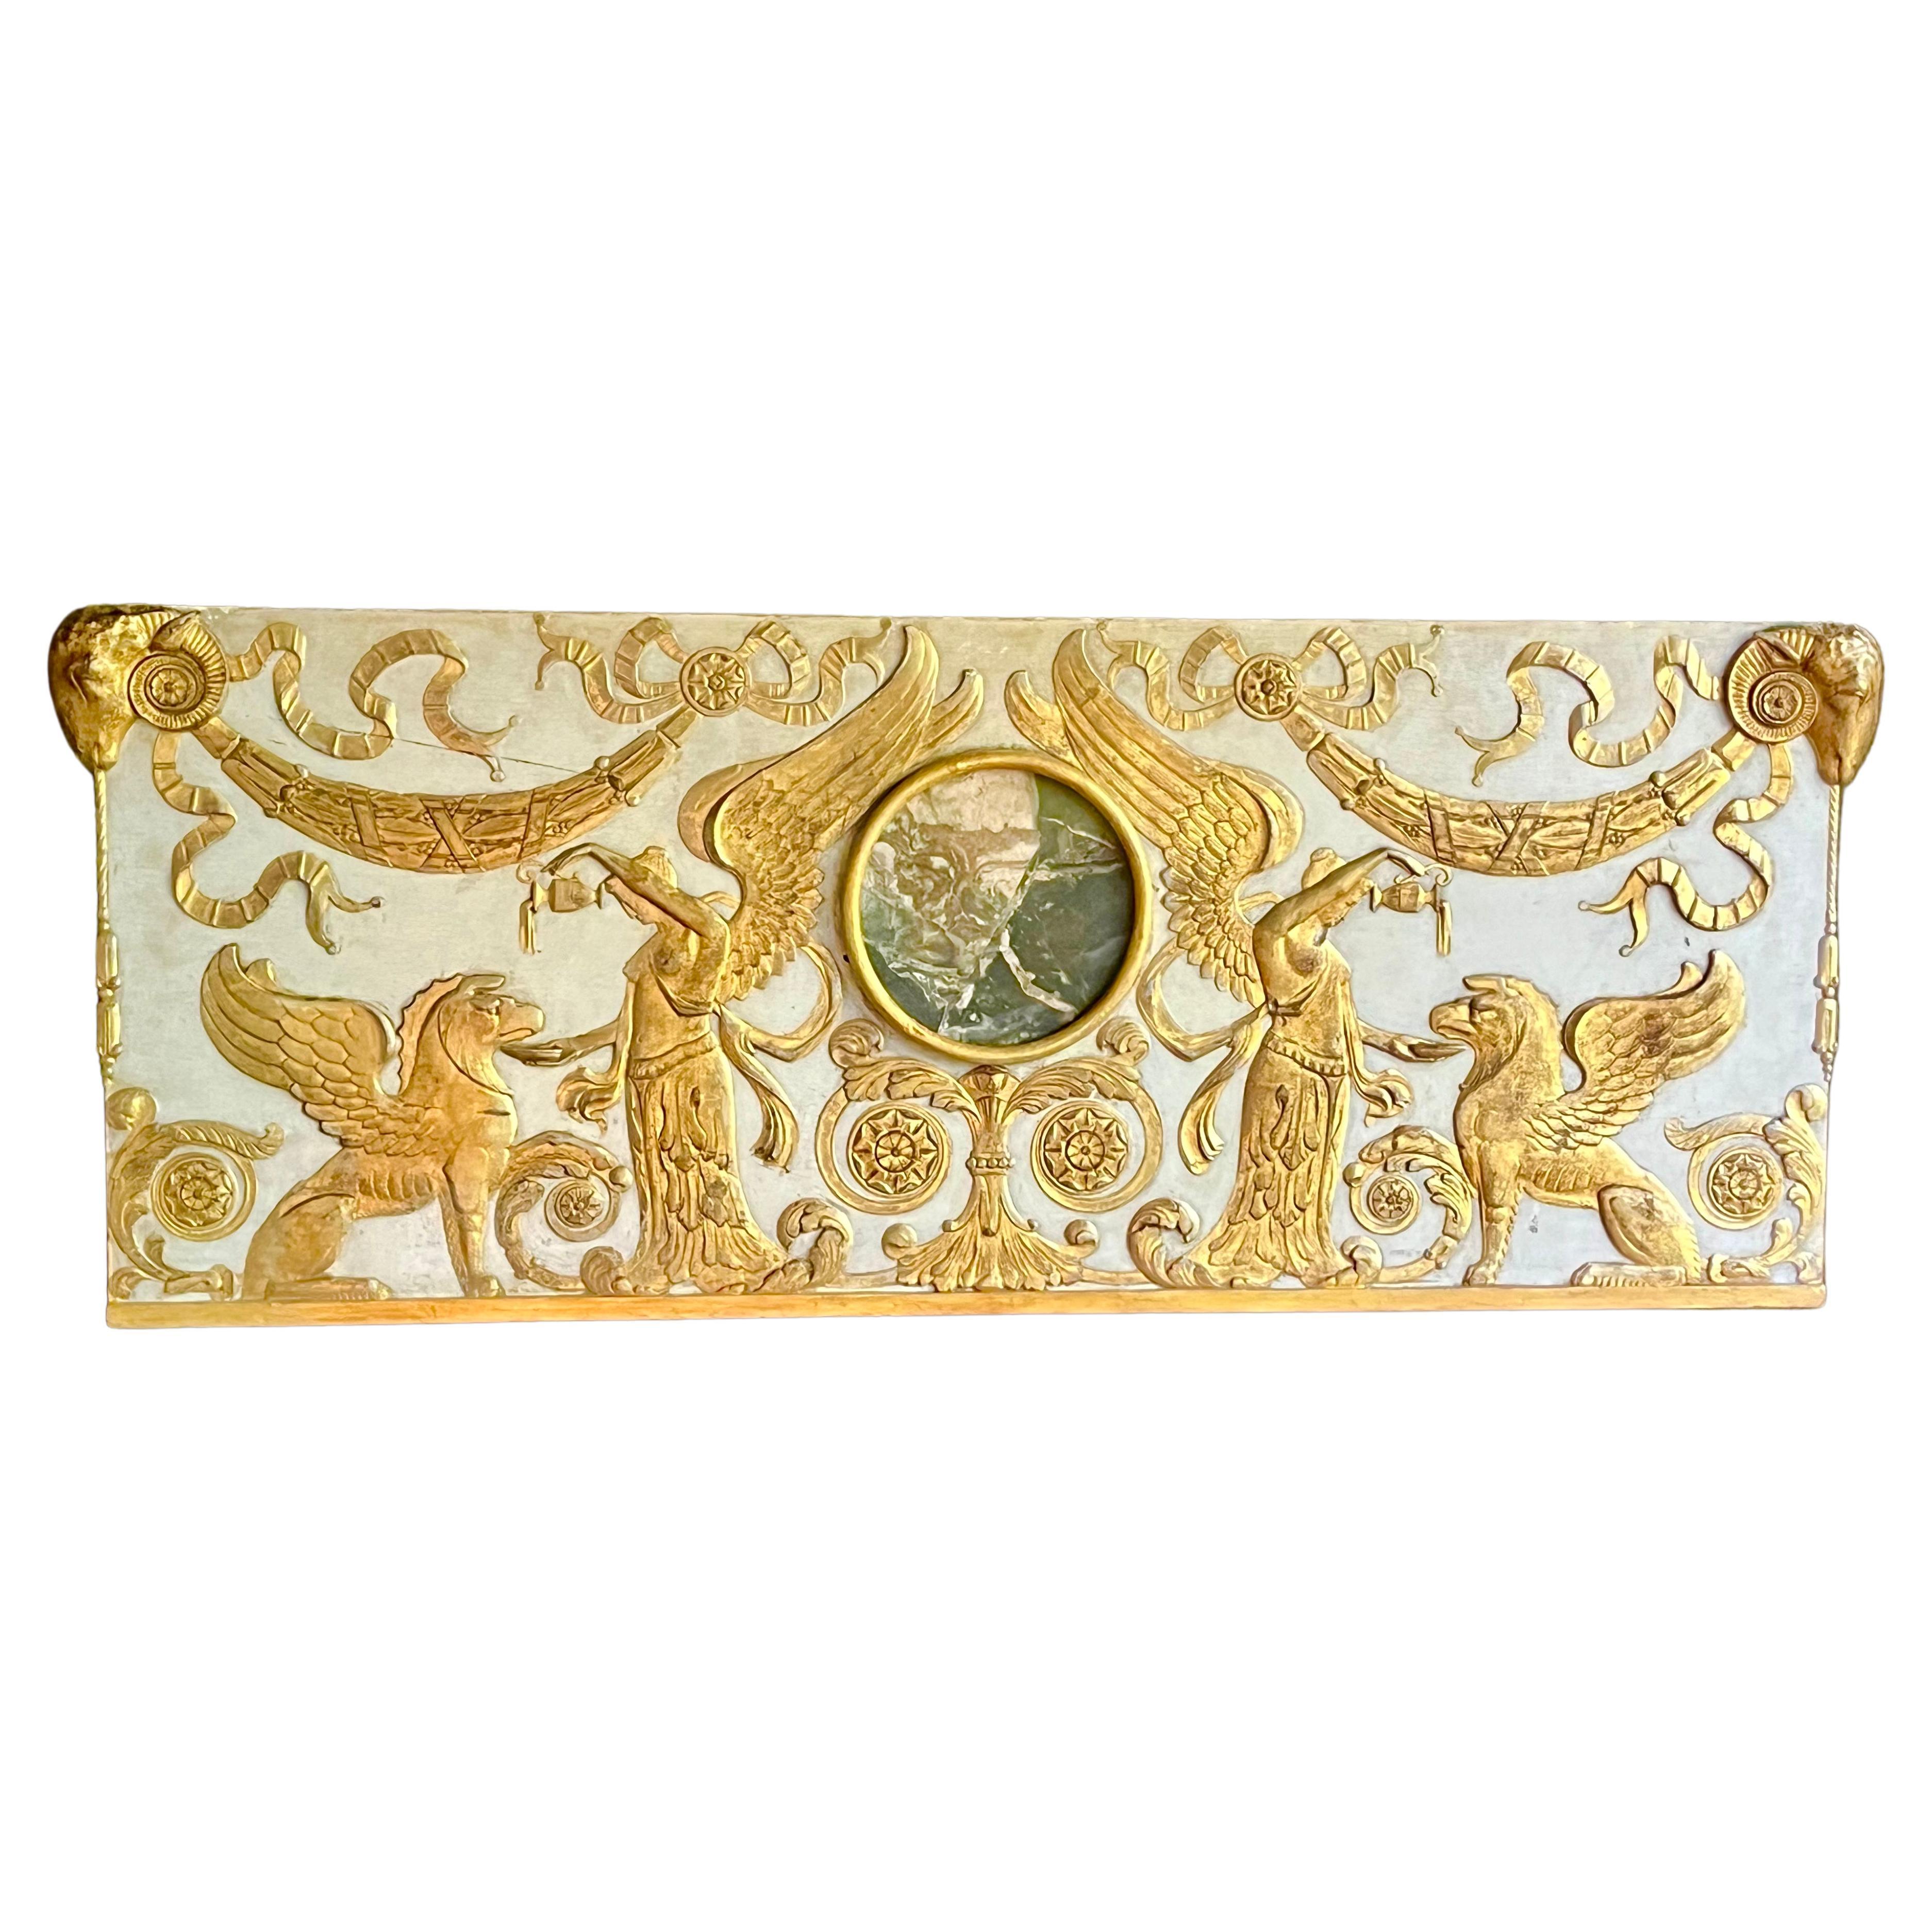 Italian Neoclassical Giltwood Decorated Boiserie Overdoor Panel   For Sale